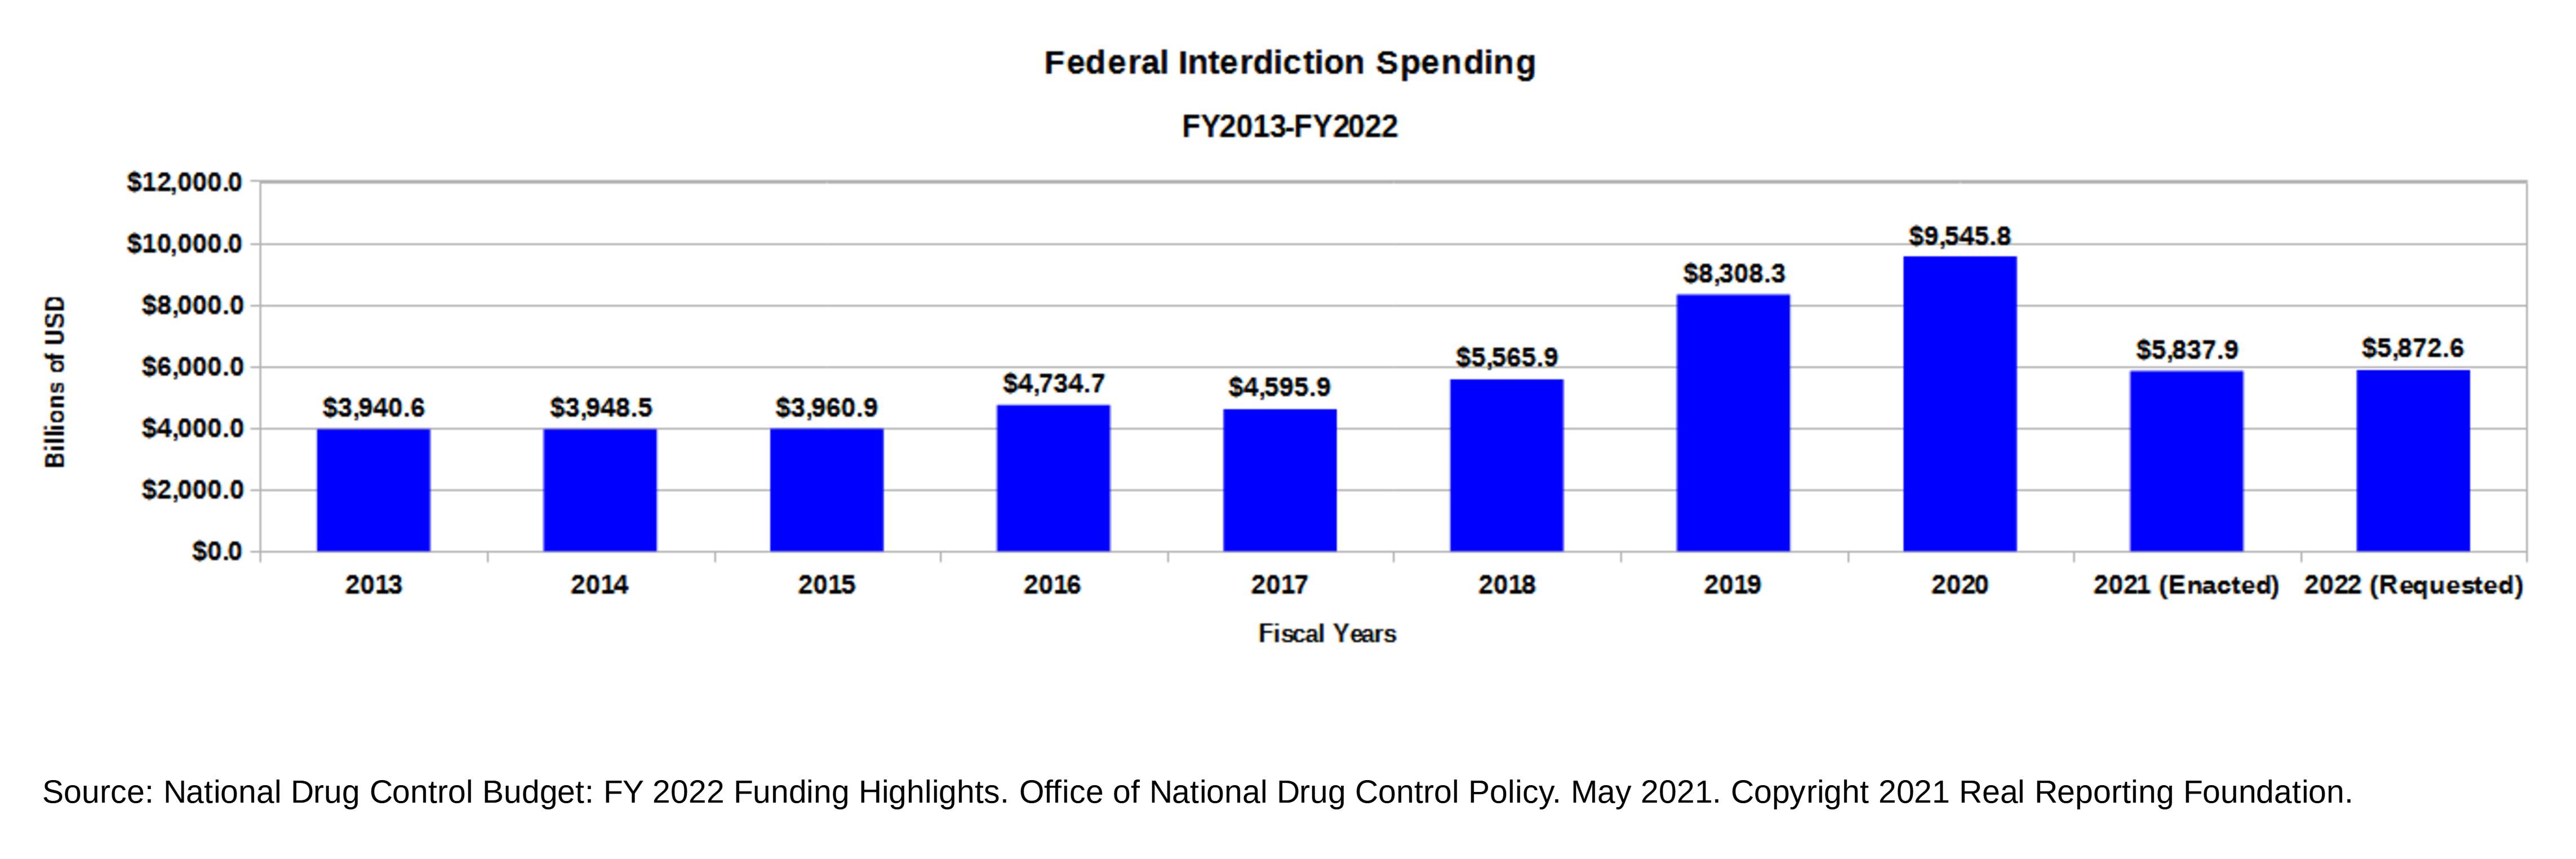 bar graph showing federal drug control spending on interdiction from FY2013 through FY2022